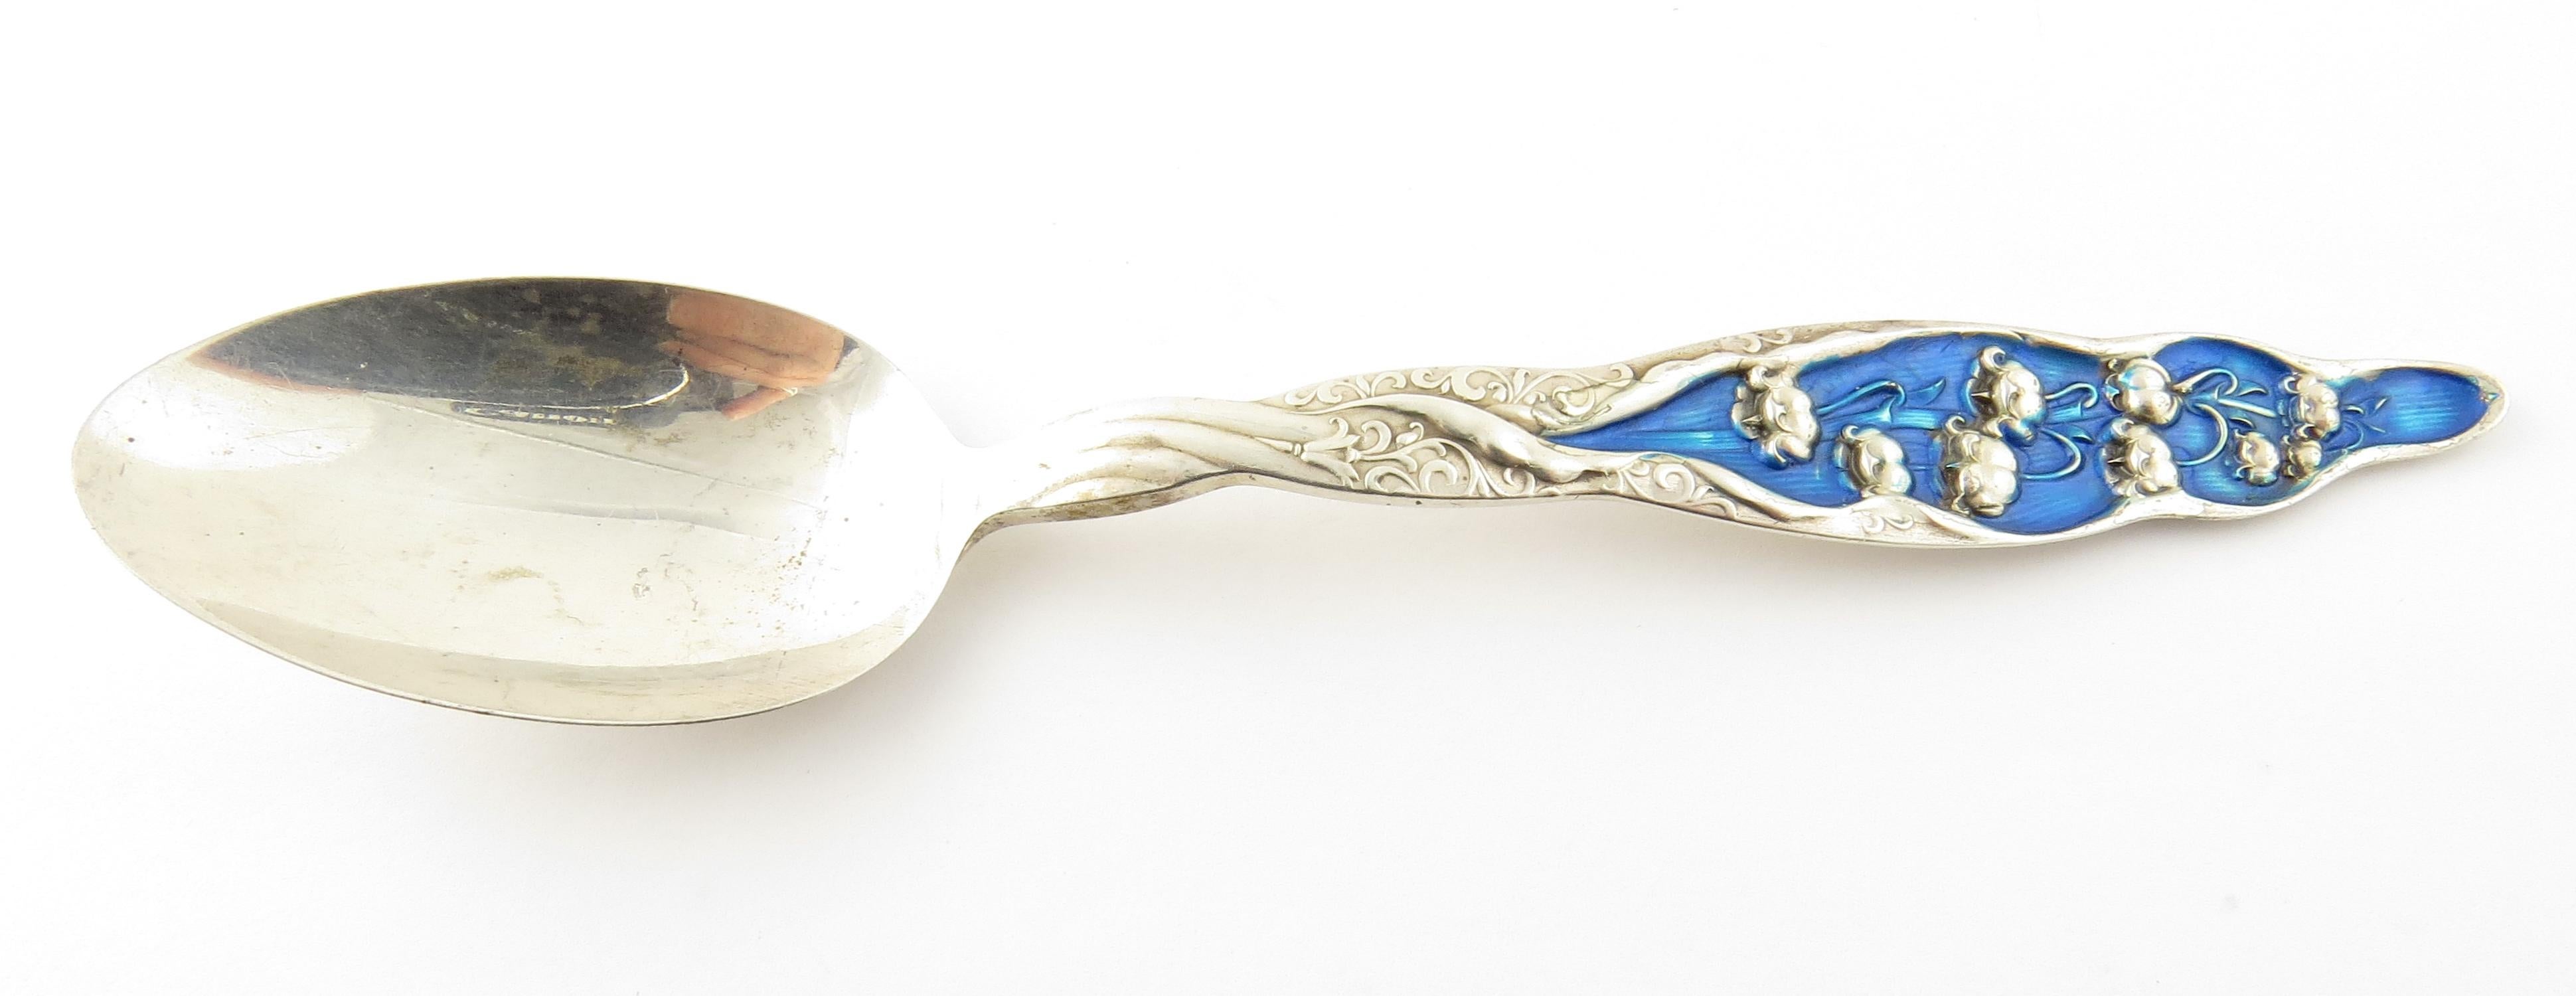 Whiting Lily of the Valley 1885 sterling silver tapered end enamel teaspoon. This is a superb whiting sterling silver teaspoon, Lily of the Valley pattern #1885 with tapered end, enameled handle. Measures: Approx 5 7/8 inches long. Spoon measures